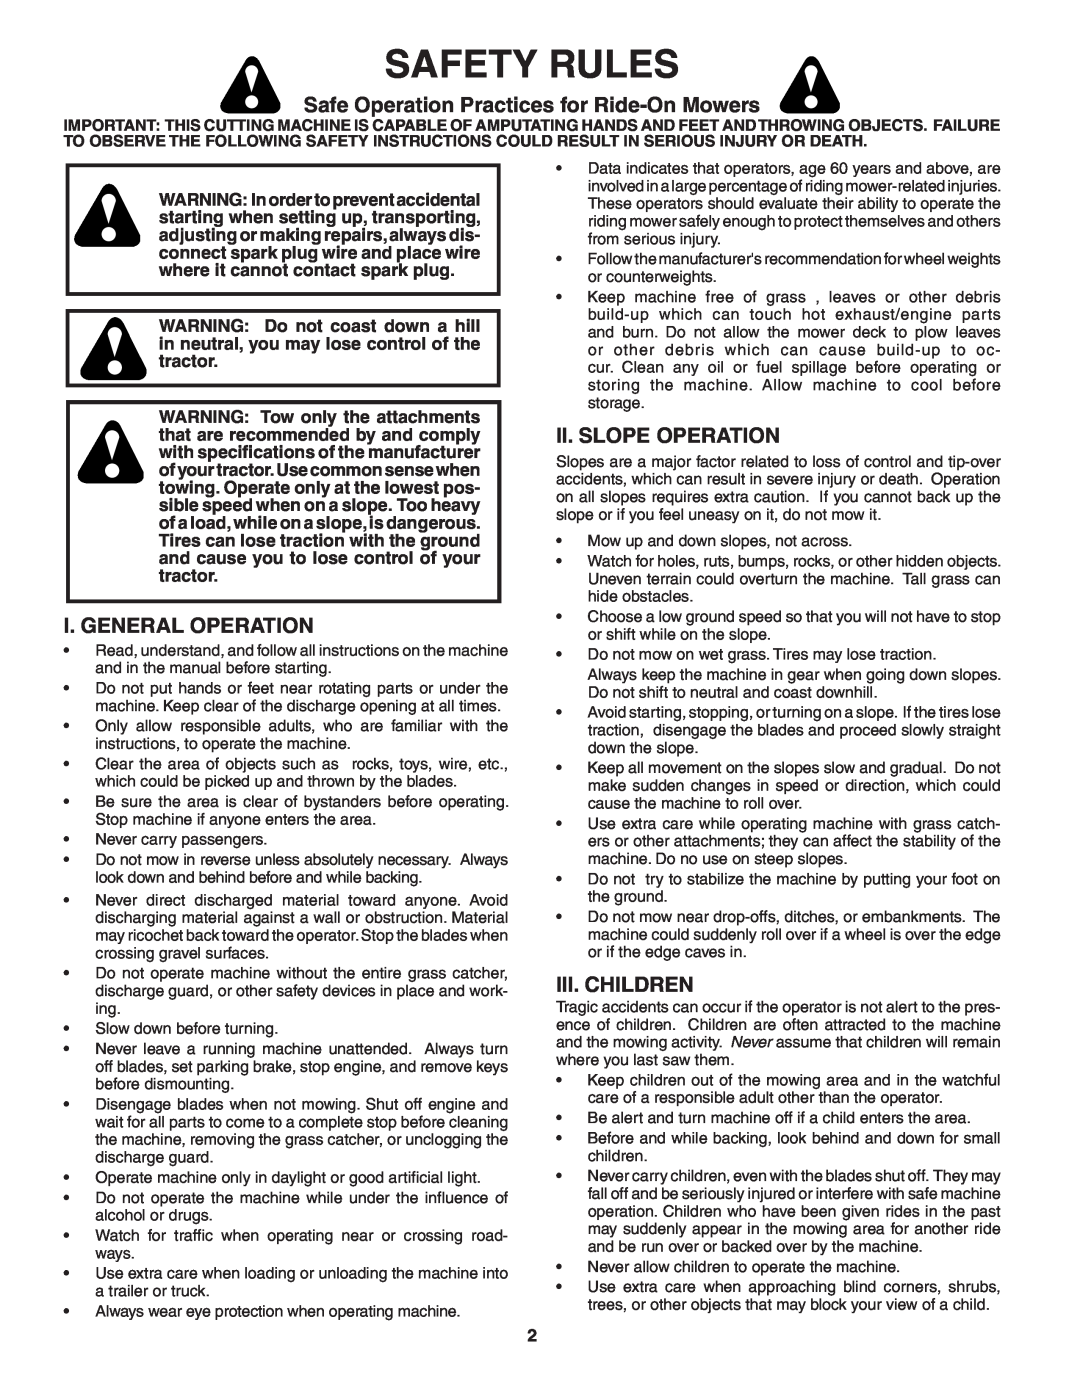 Poulan 194915 Safety Rules, Safe Operation Practices for Ride-OnMowers, I. General Operation, Ii. Slope Operation 